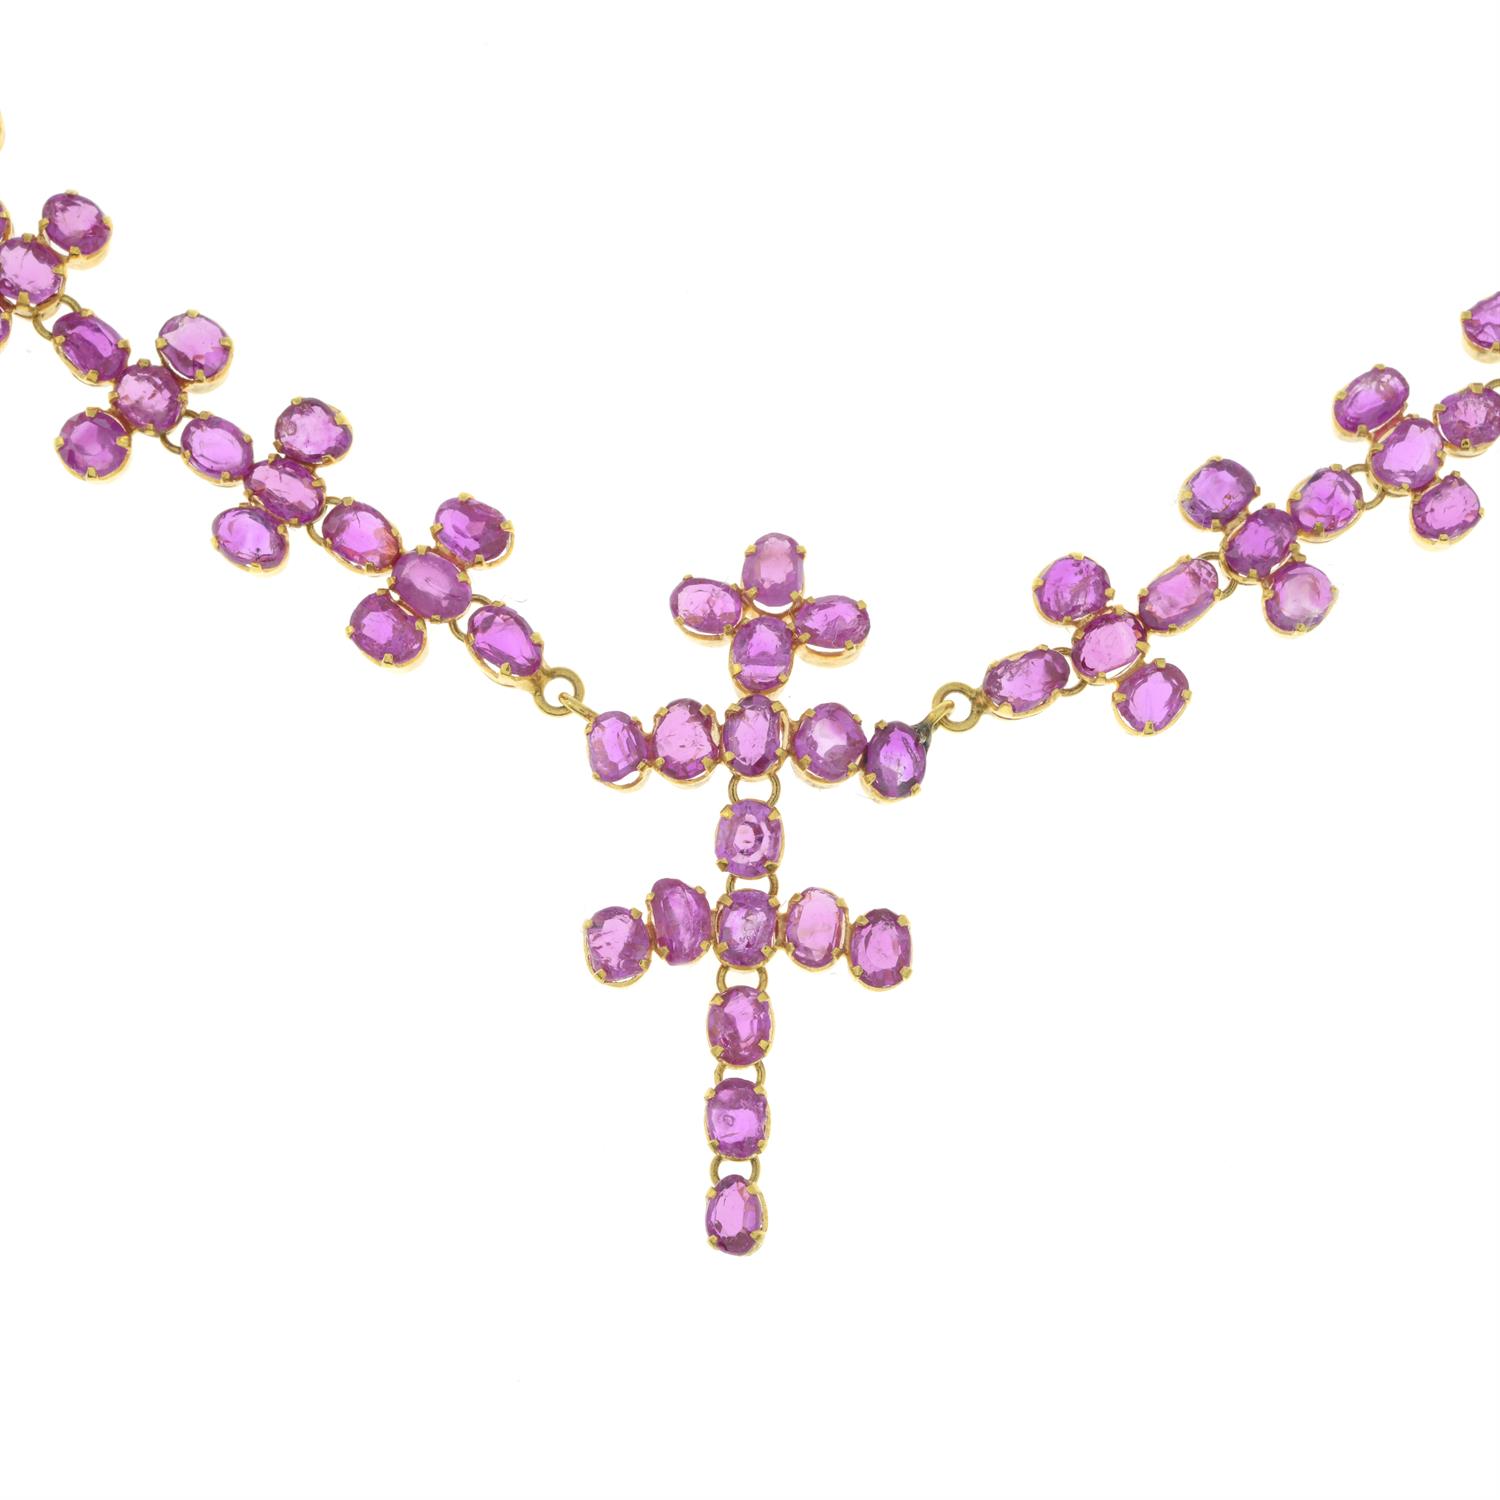 Pink sapphire necklace - Image 4 of 6